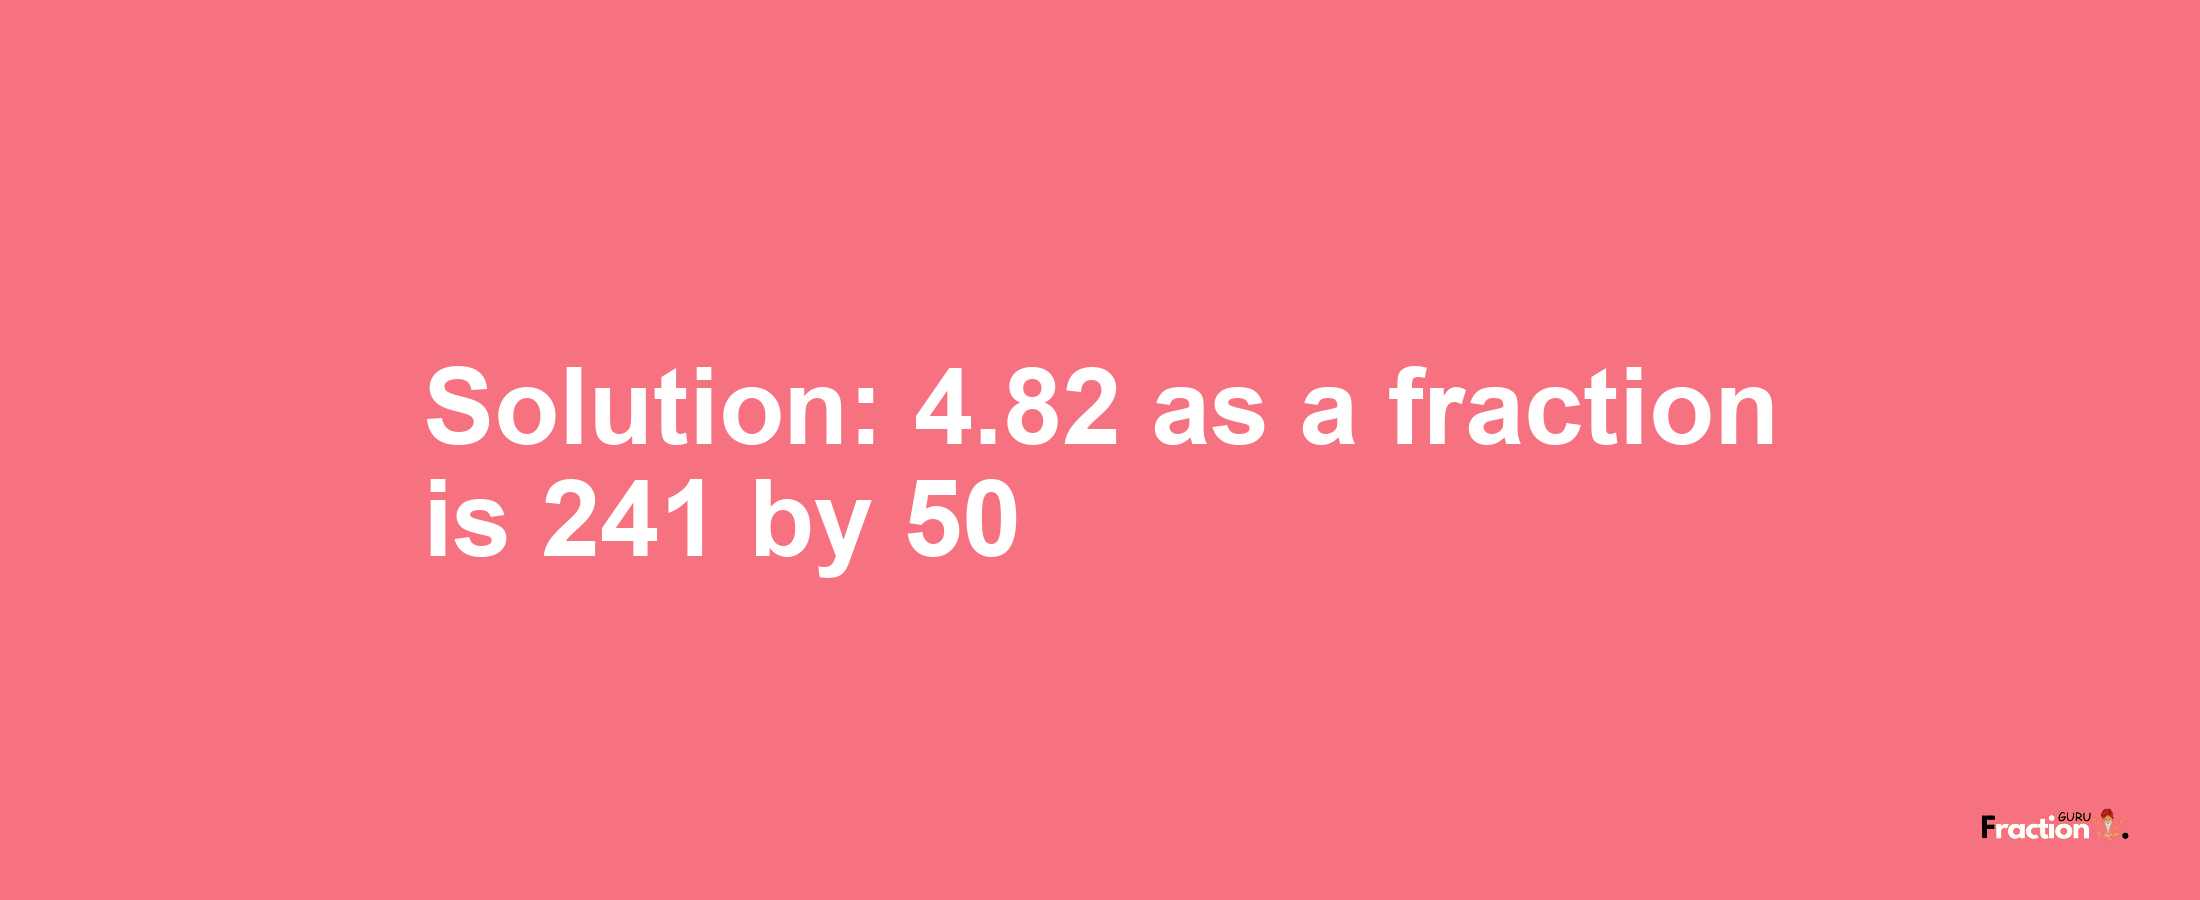 Solution:4.82 as a fraction is 241/50